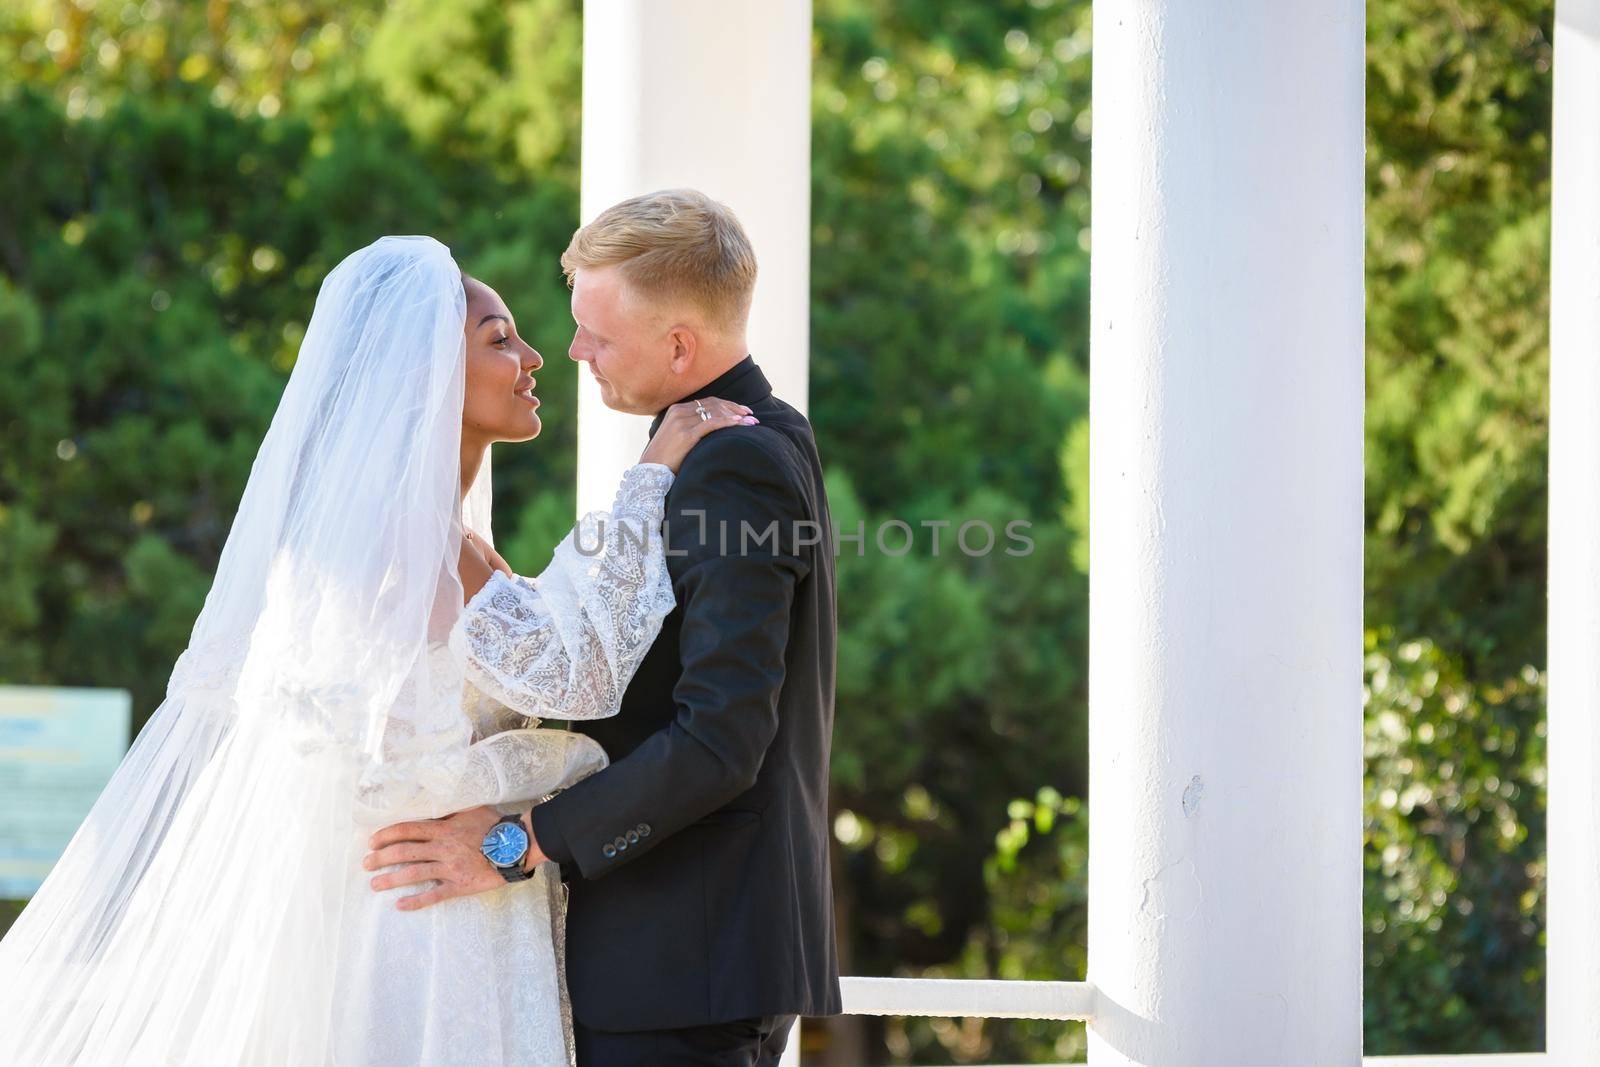 Mixed-racial newlyweds on a walk hugging and lovingly look at each other